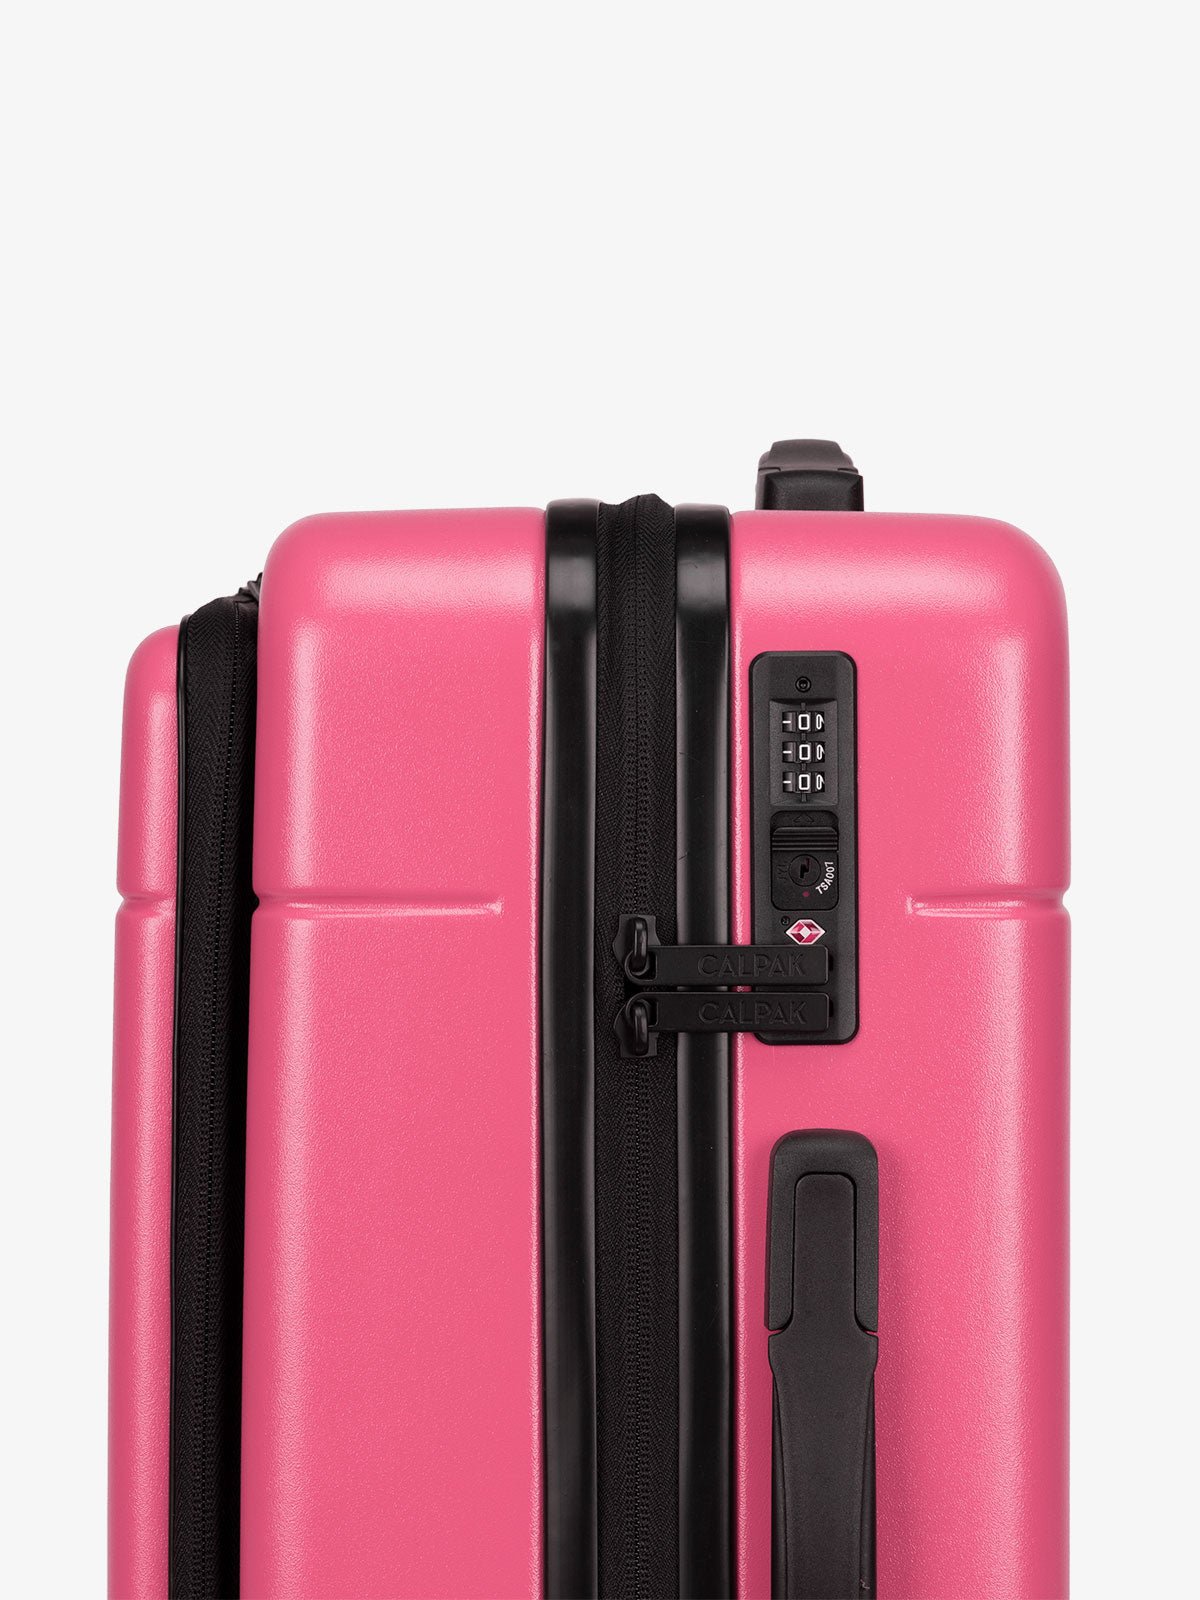 CALPAK Hue Front Pocket Carry-On Luggage with tsa approved lock in dragonfruit